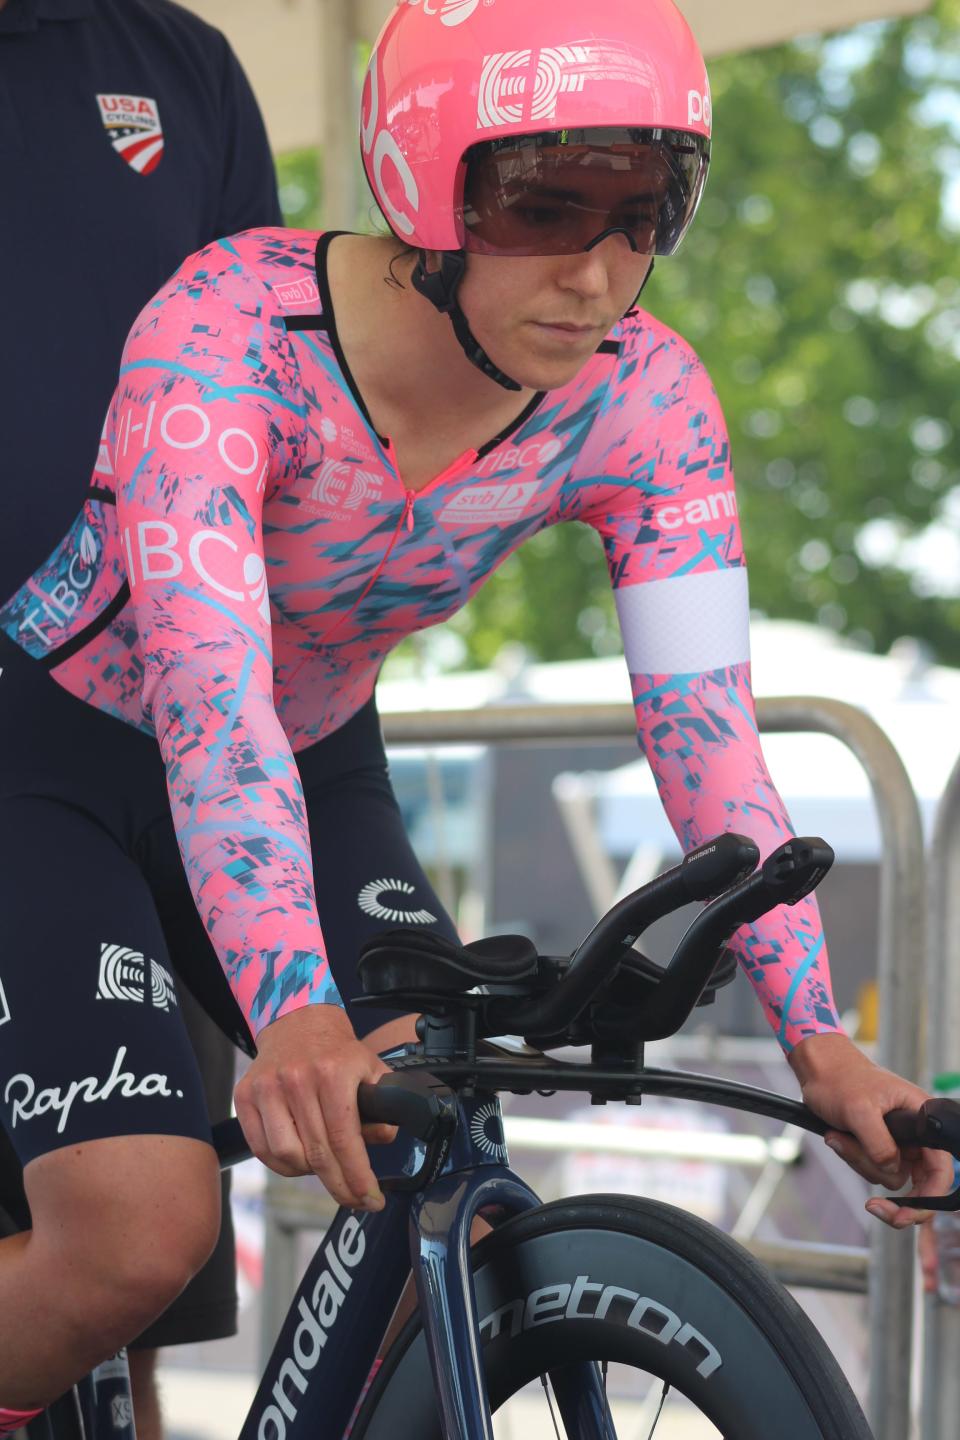 Emma Langley awaits her turn at the USA Cycling Championships 2022: Individual Time Trials in Oak Ridge on Thursday, June 23.